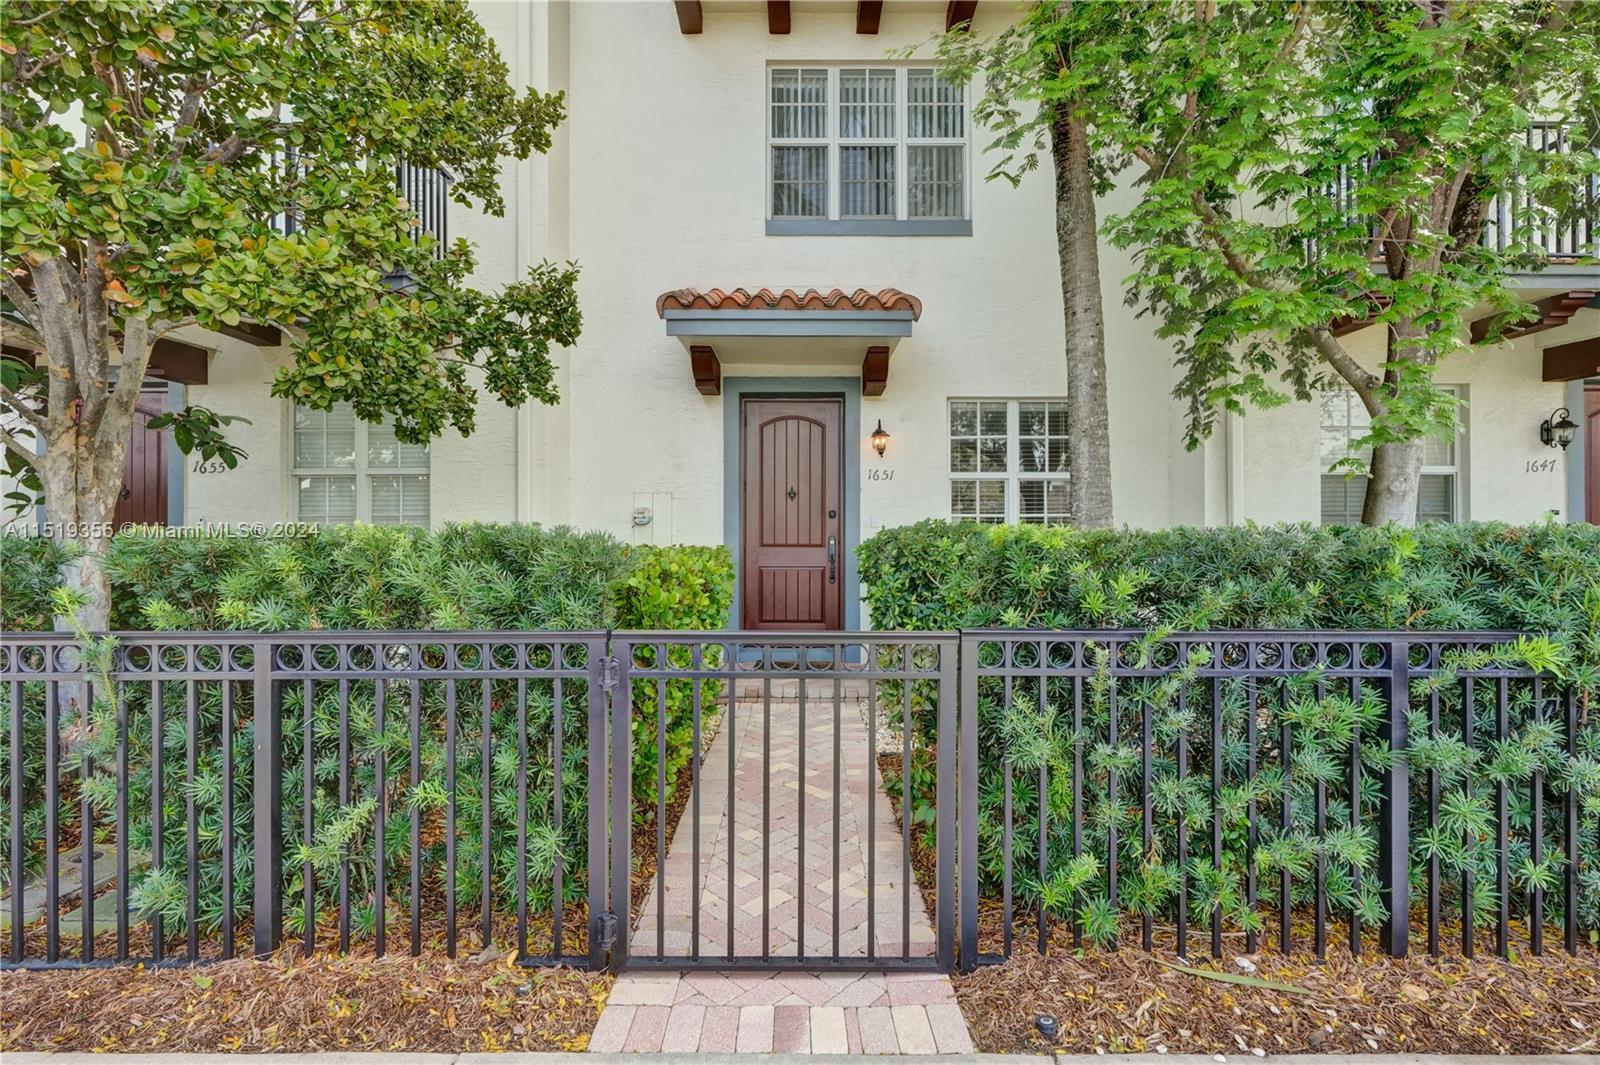 Nestled within the vibrant heart of Delray Beach, this exquisite three-story townhome offers both lu